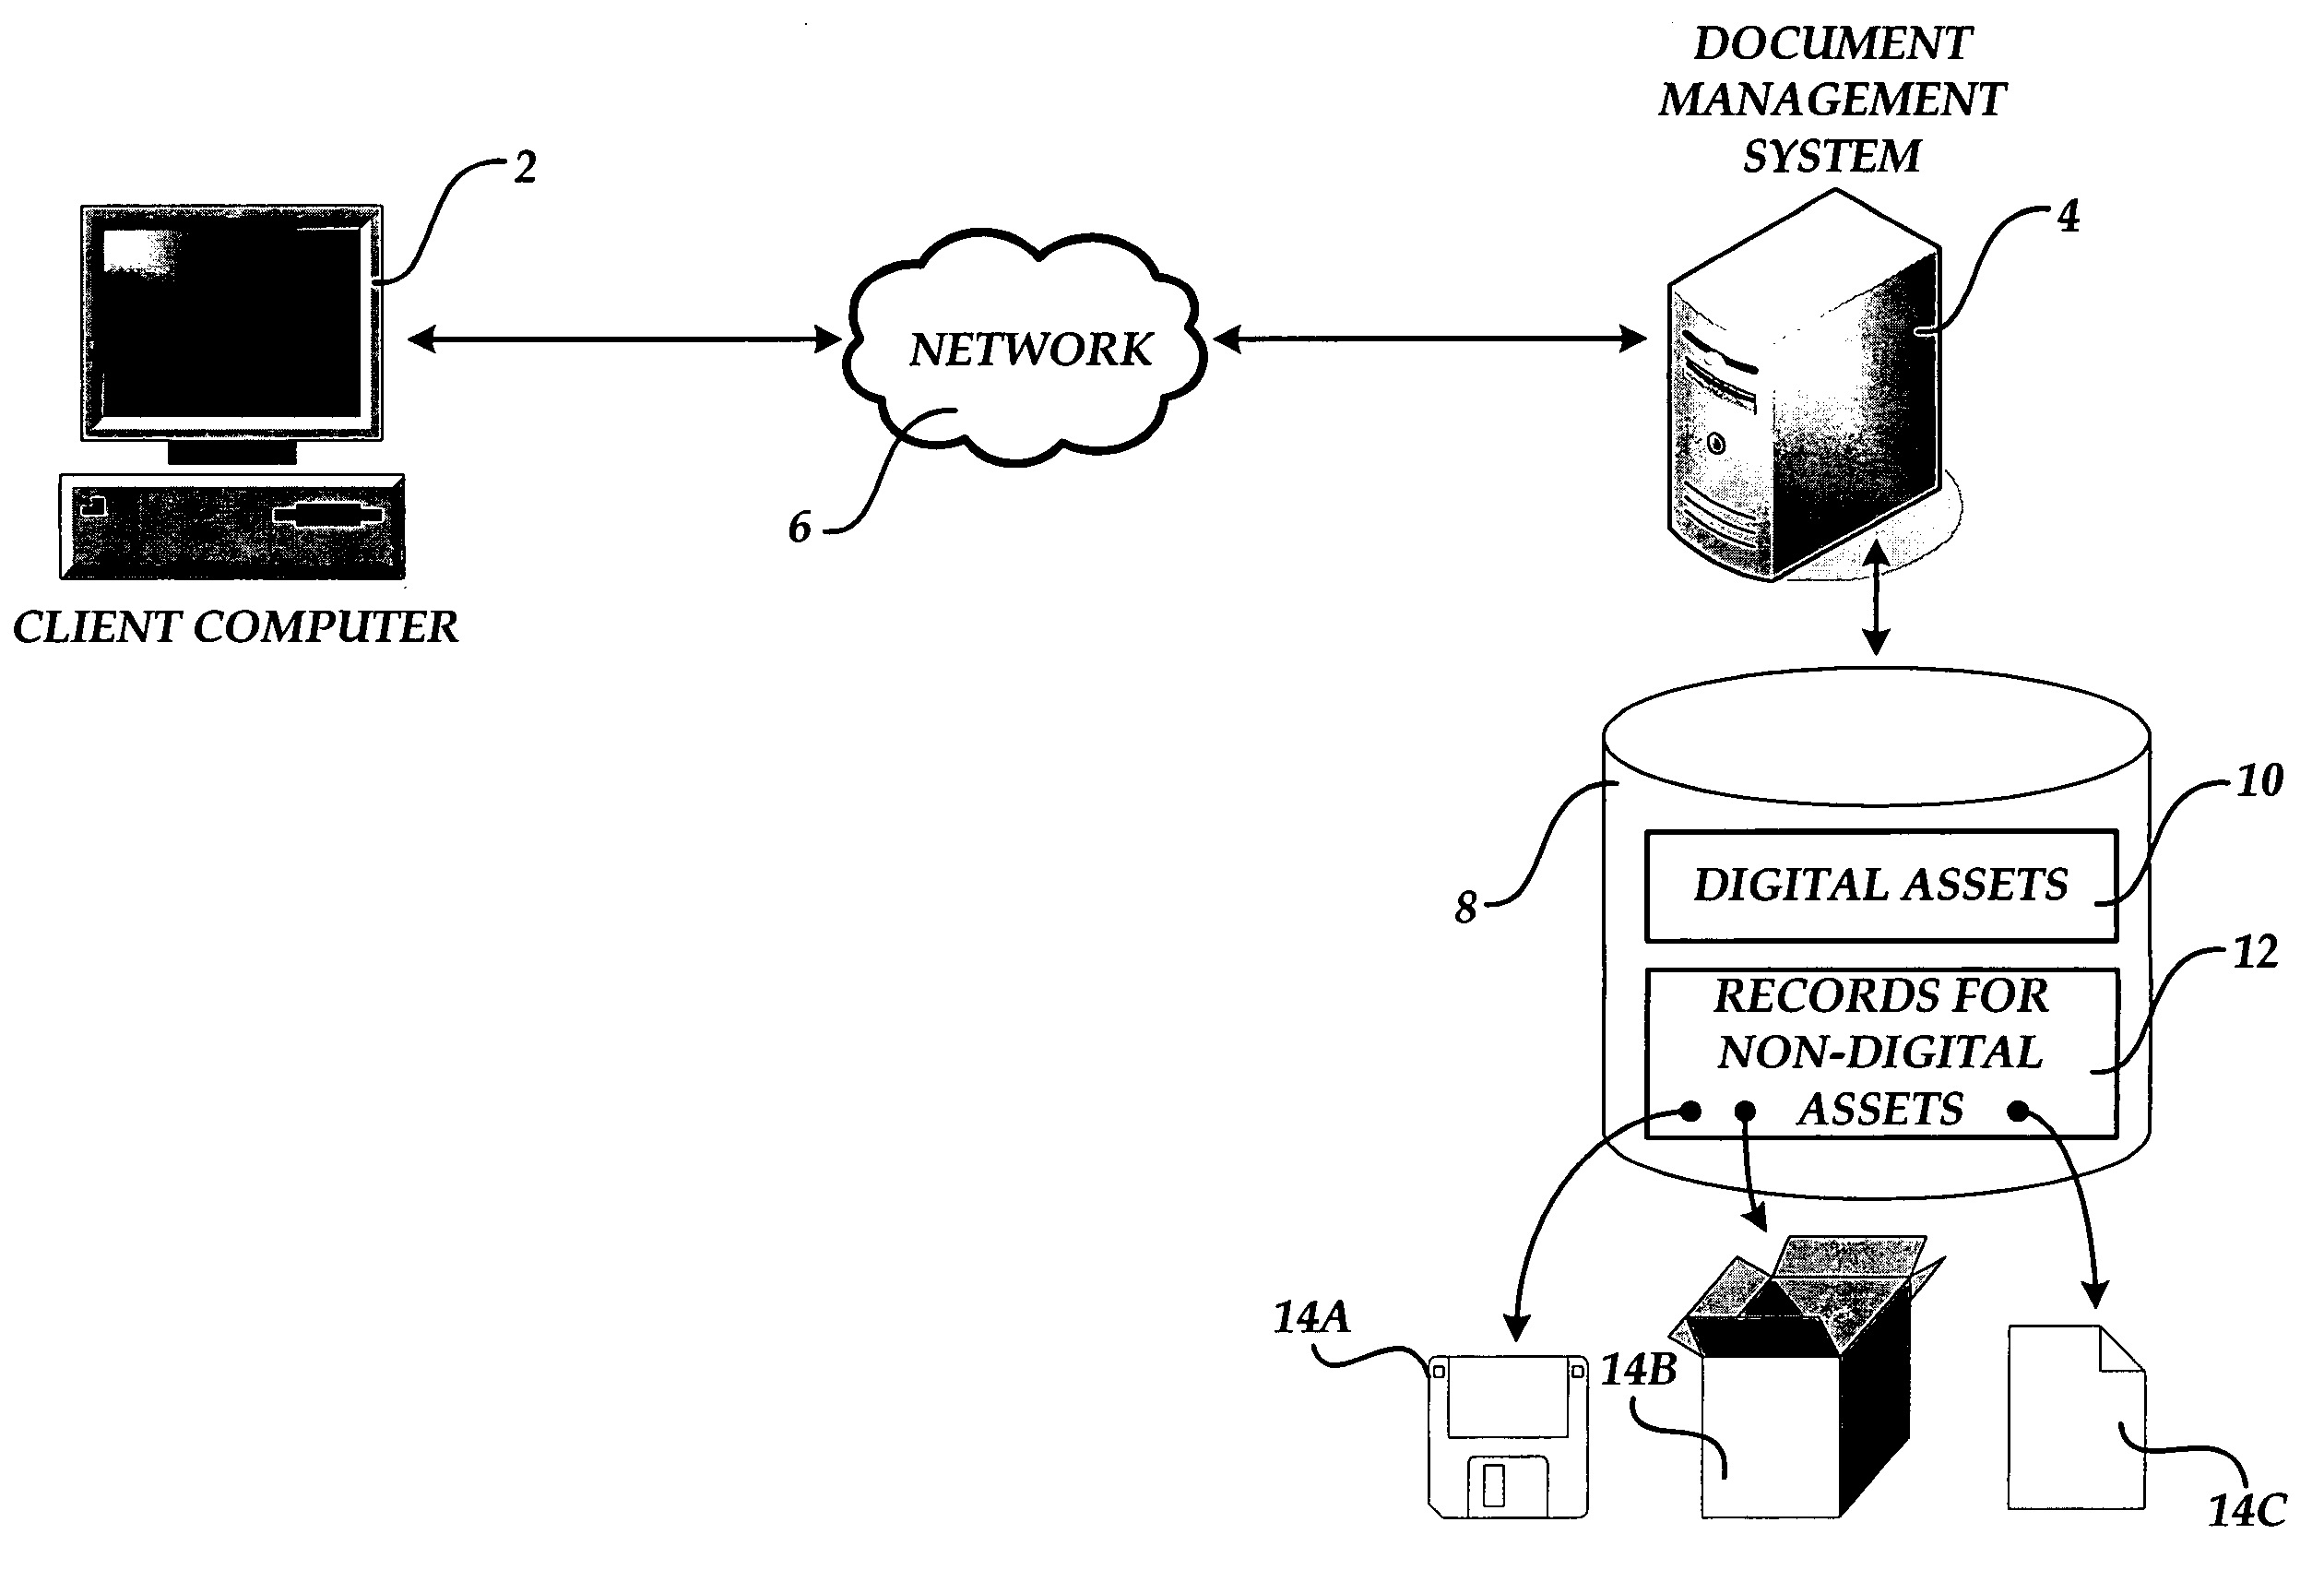 Method and computer-readable medium for jointly managing digital assets and non-digital assets